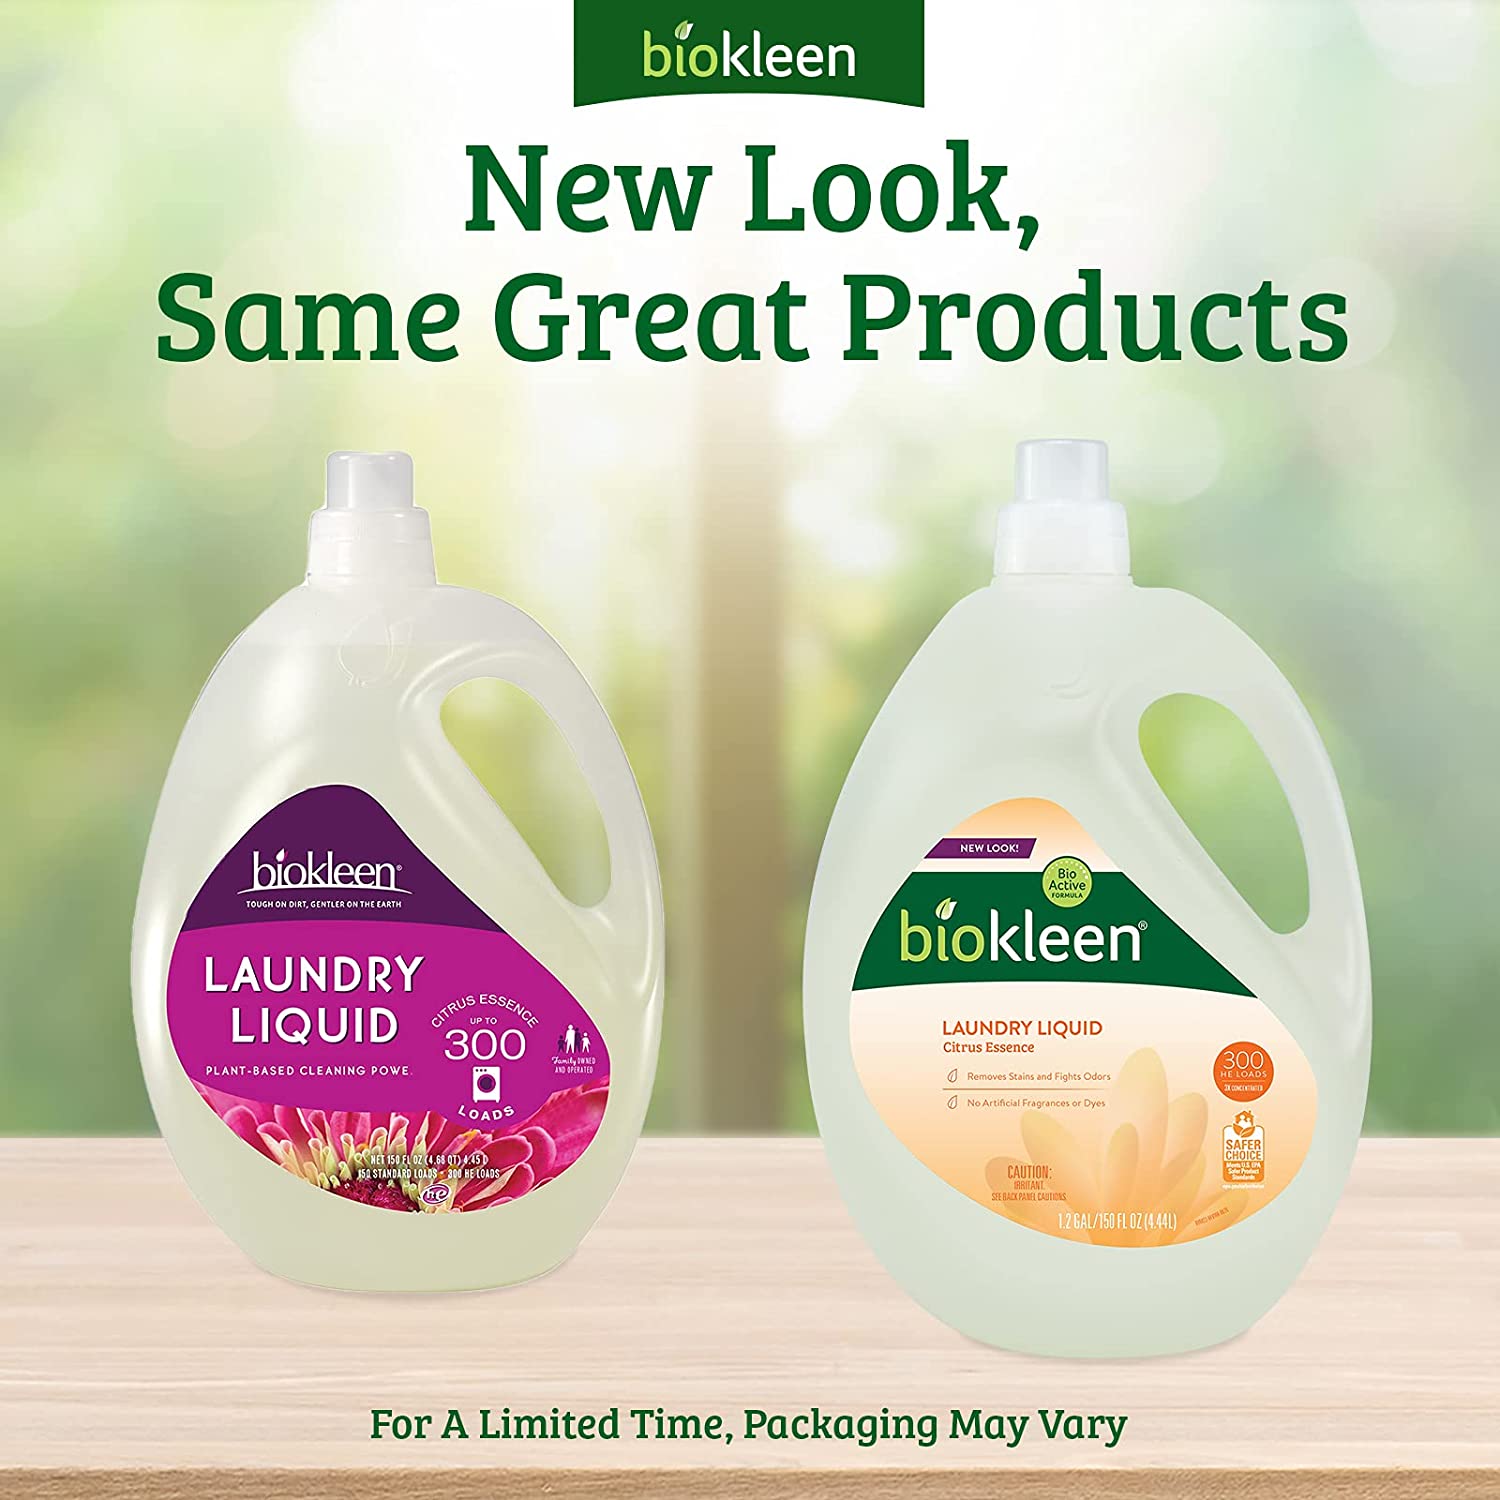 Biokleen Natural Laundry Detergent Liquid - 300 Loads- Eco Friendly Concentrated Plant Based Safe for Kids and Pets No Artificial Colors or Preservatives - image 5 of 6